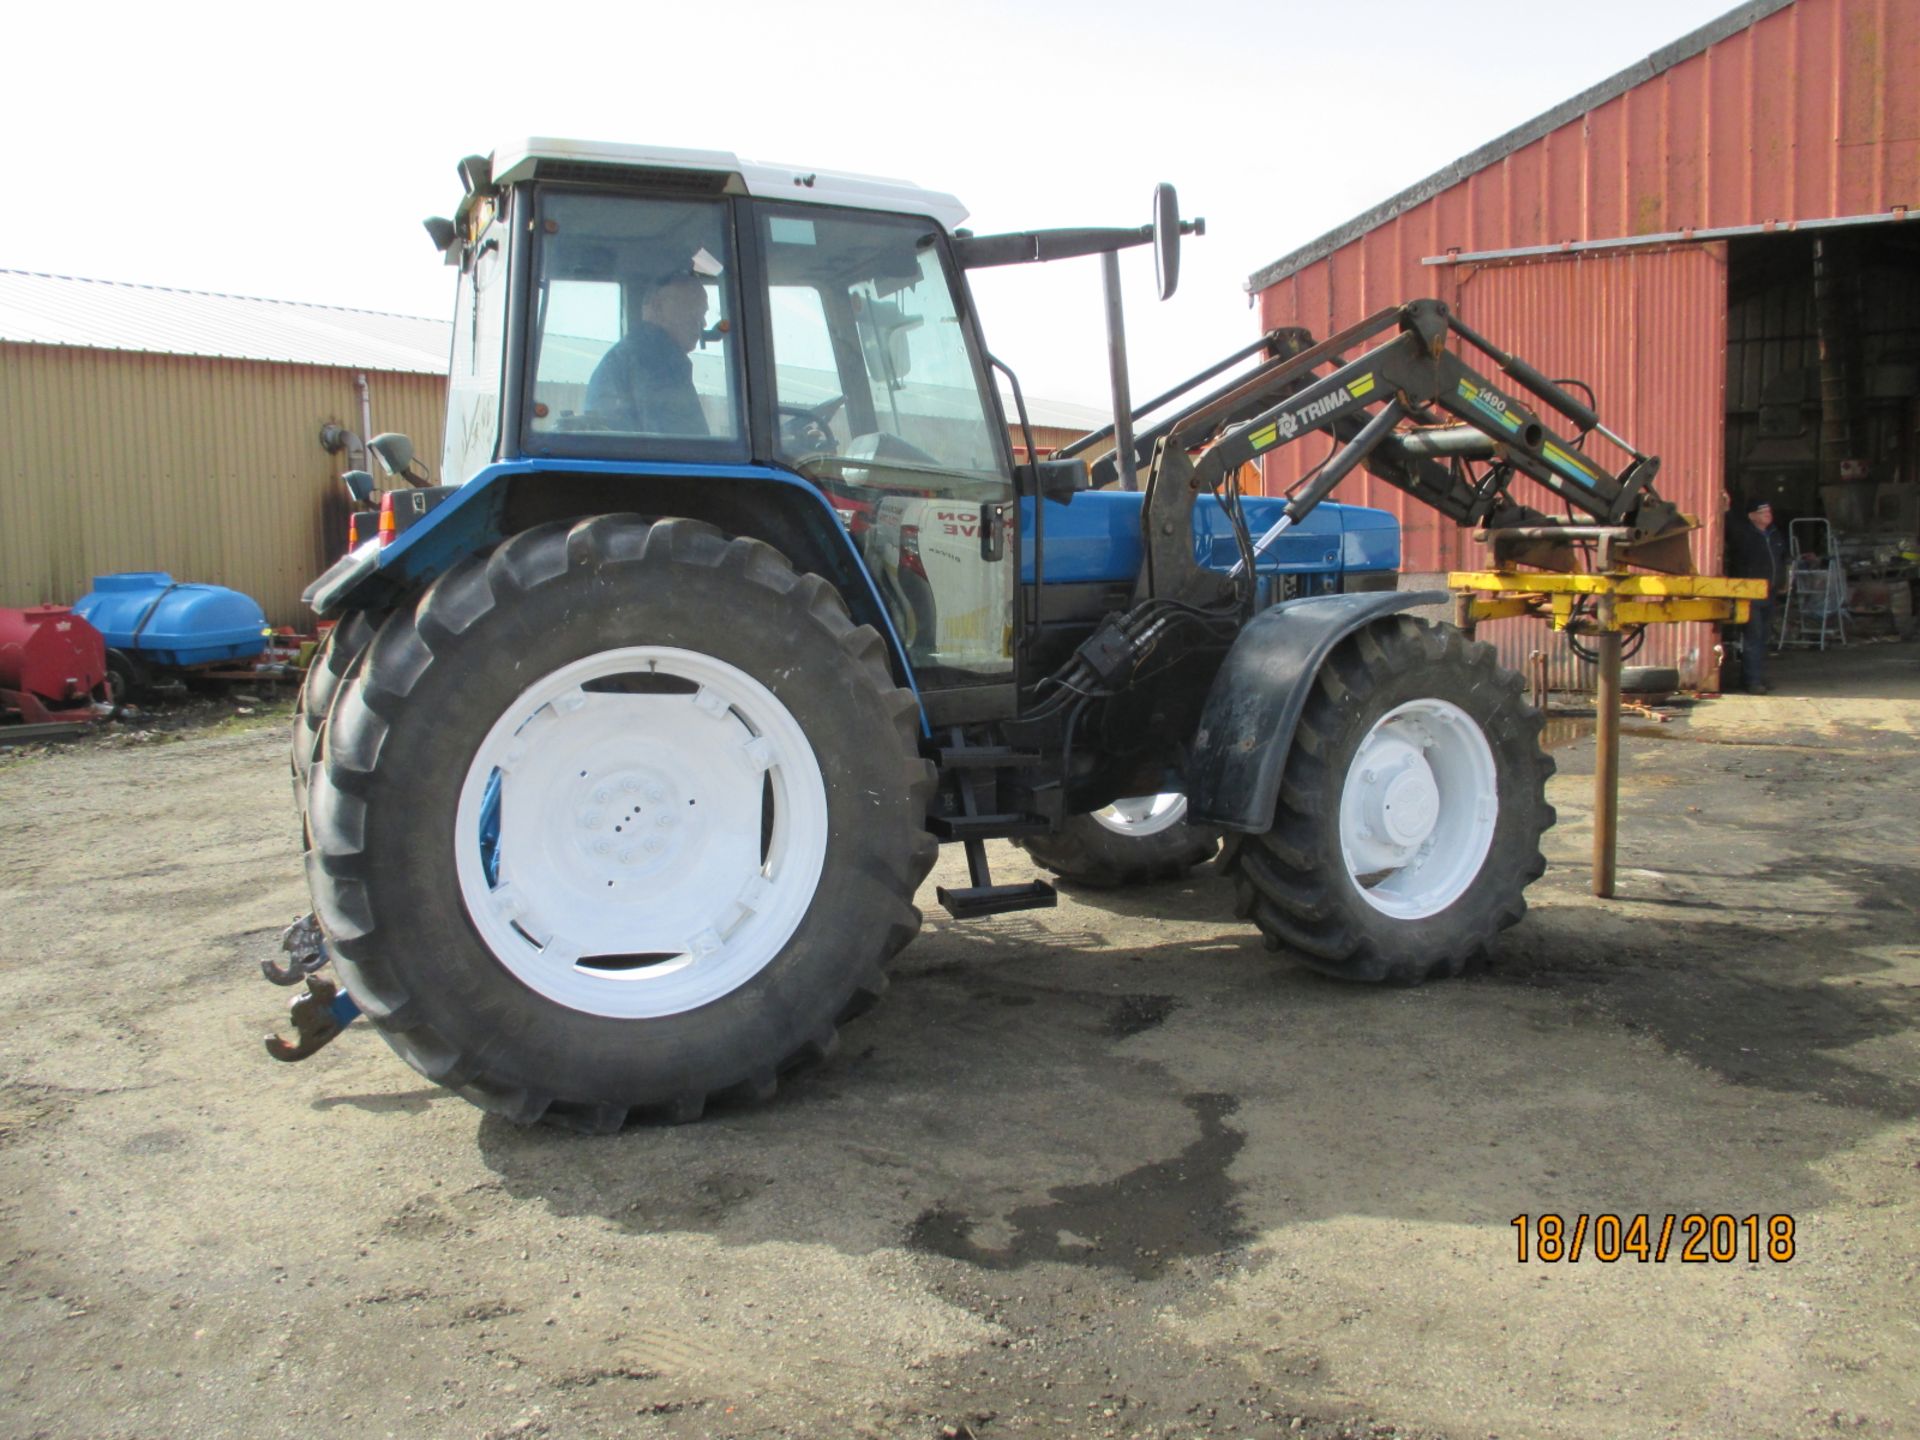 1 No. M802 HSE - Ford New Holland 8340 SLE 4 Wheel Drive Tractor - Image 3 of 4